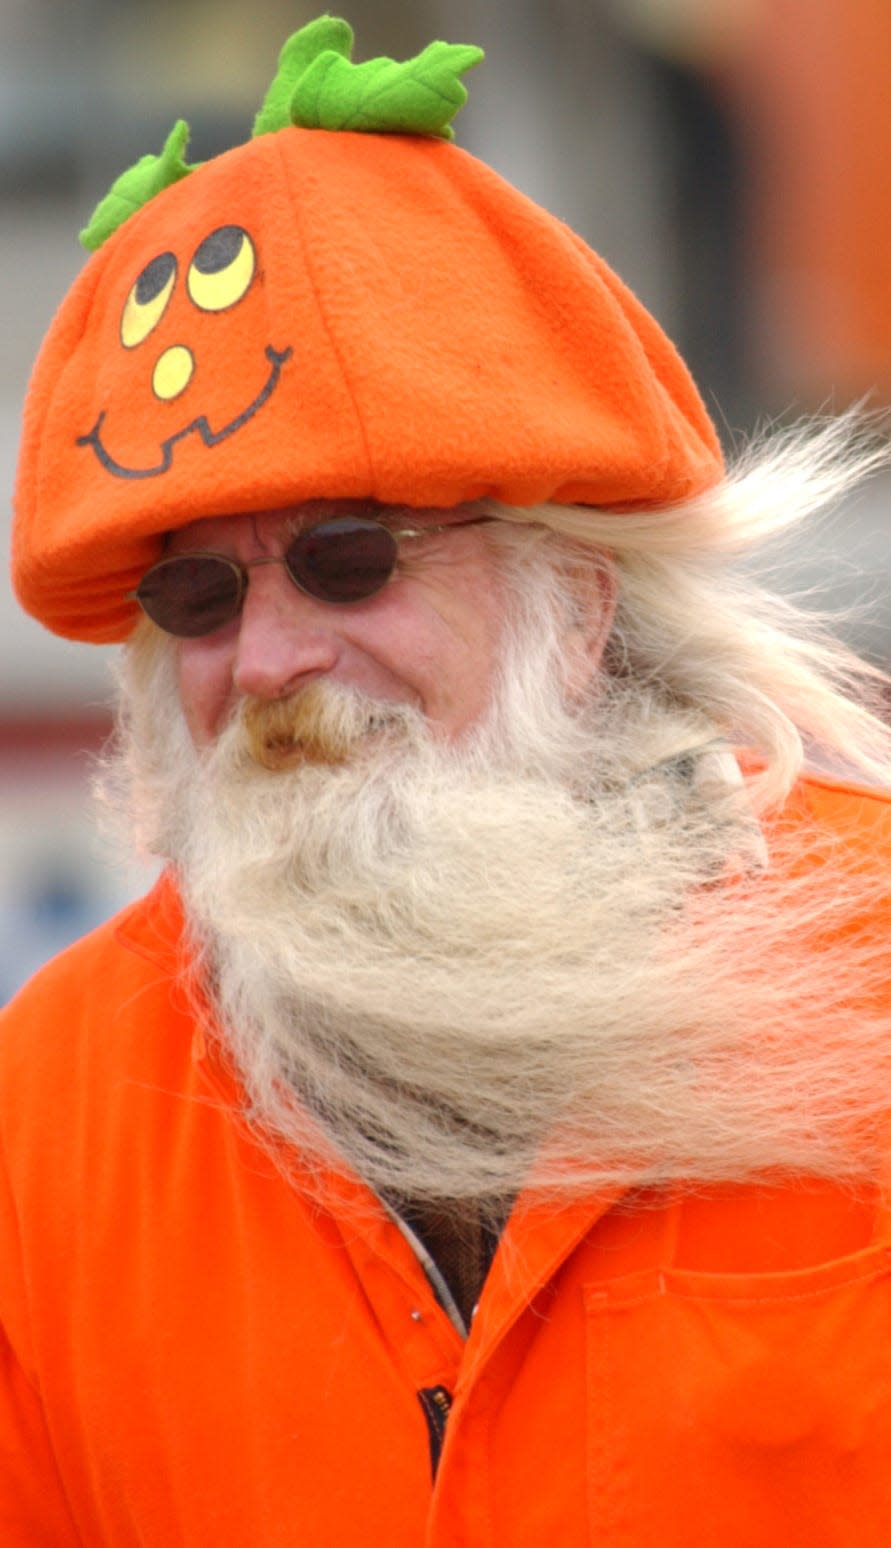 Nov. 3, 2007: Ken "Mad Dog" Haynes, of Millsboro, braving high winds and flying pumpkins during second day of the annual Punkin Chunkin competition.